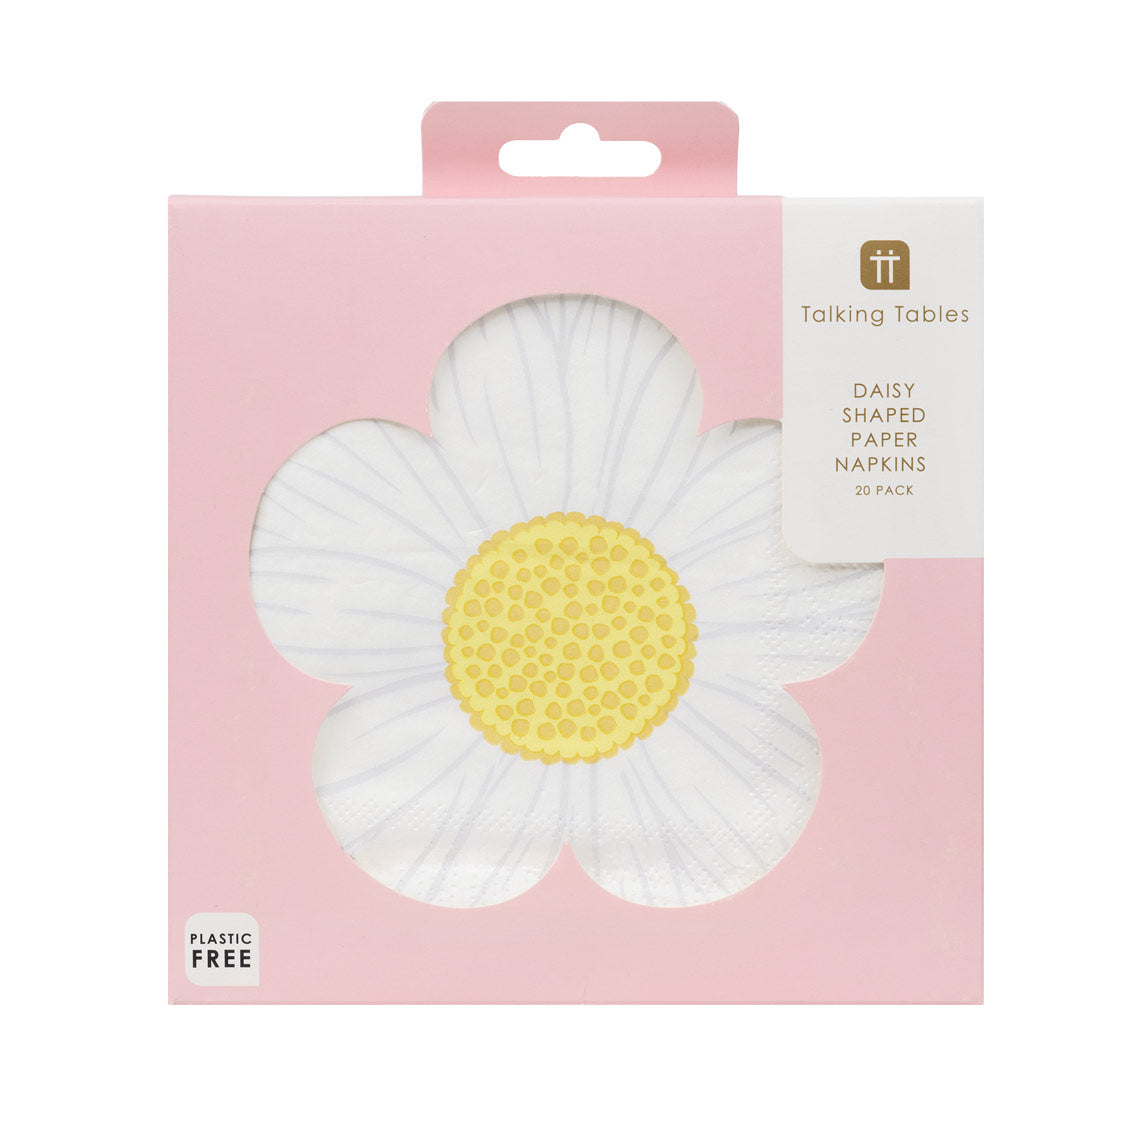 Mellow Daisy Paper Napkins - 20 Pack in packaging by penny black